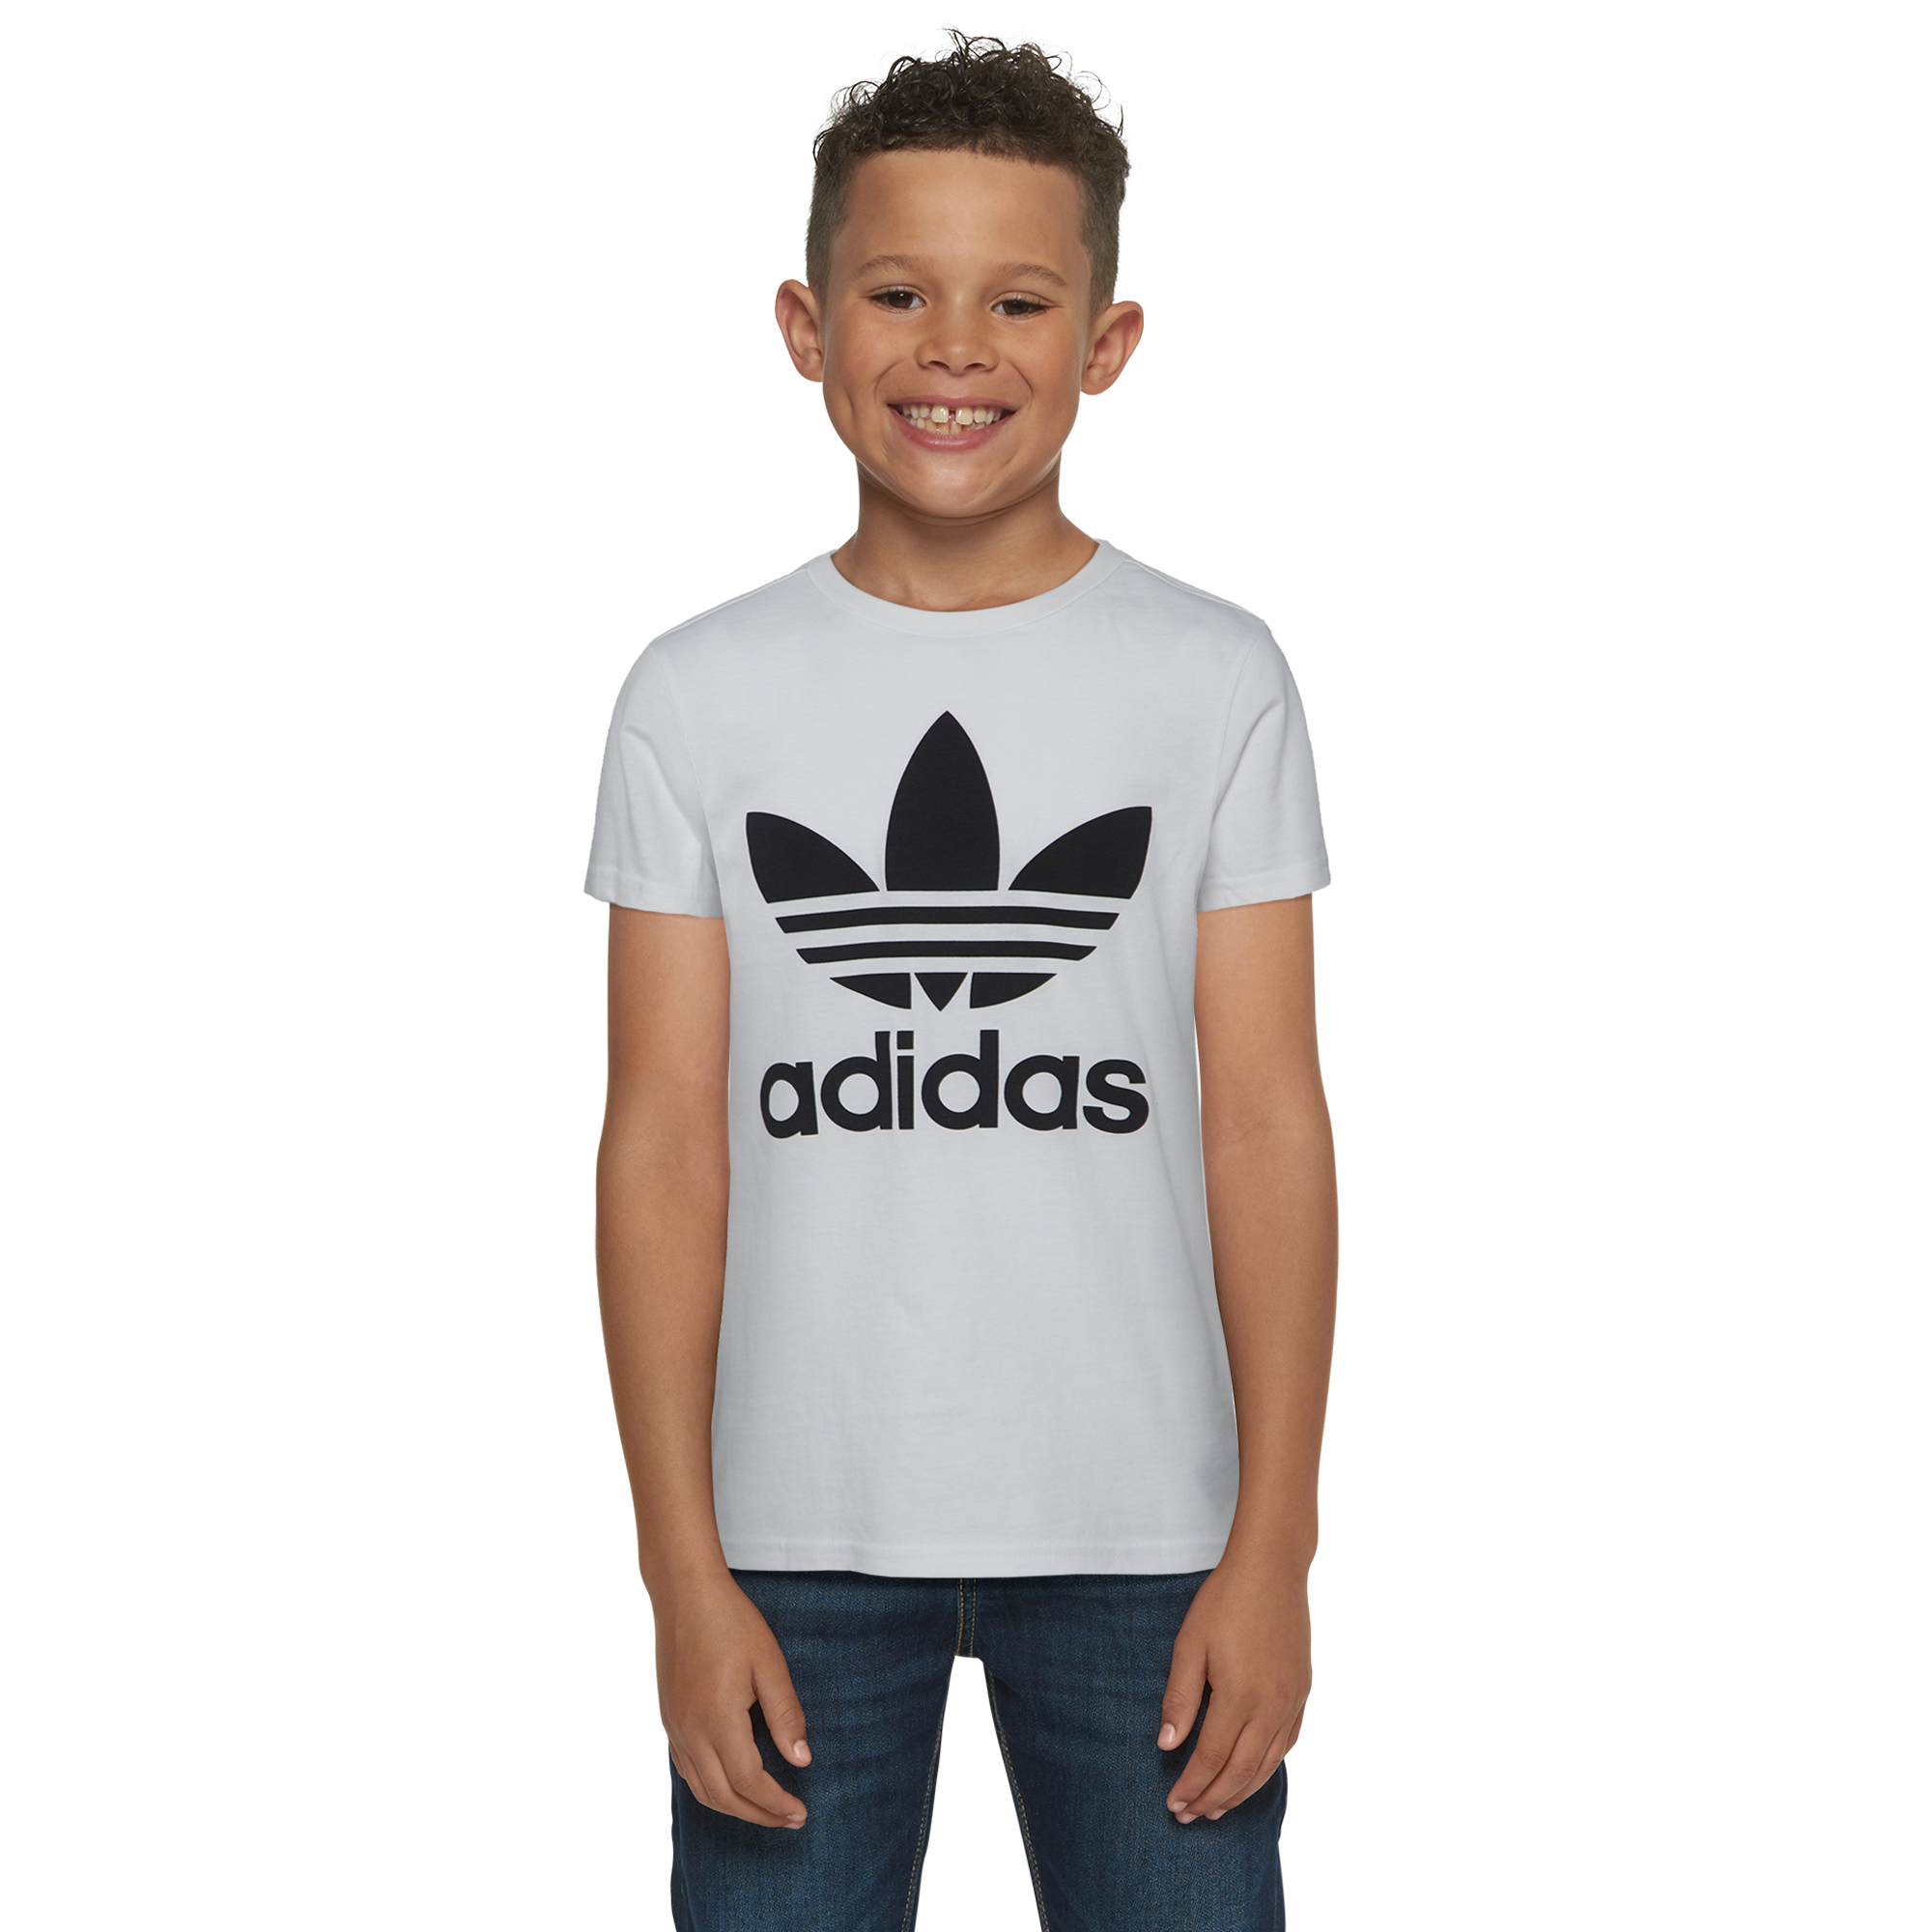 youth adidas clothes